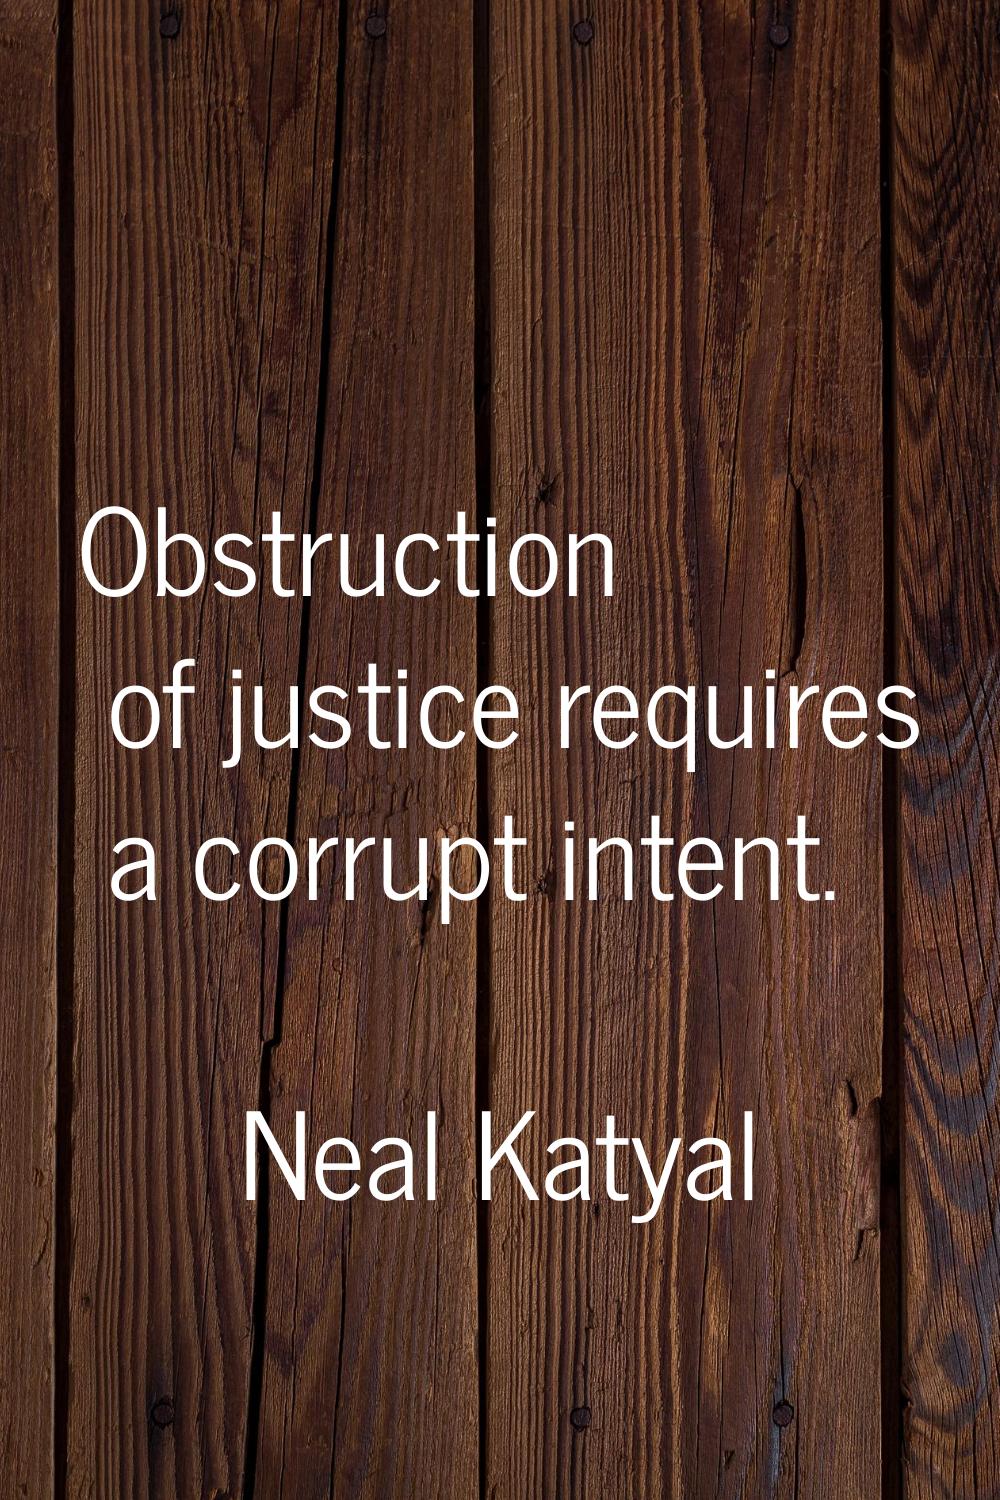 Obstruction of justice requires a corrupt intent.